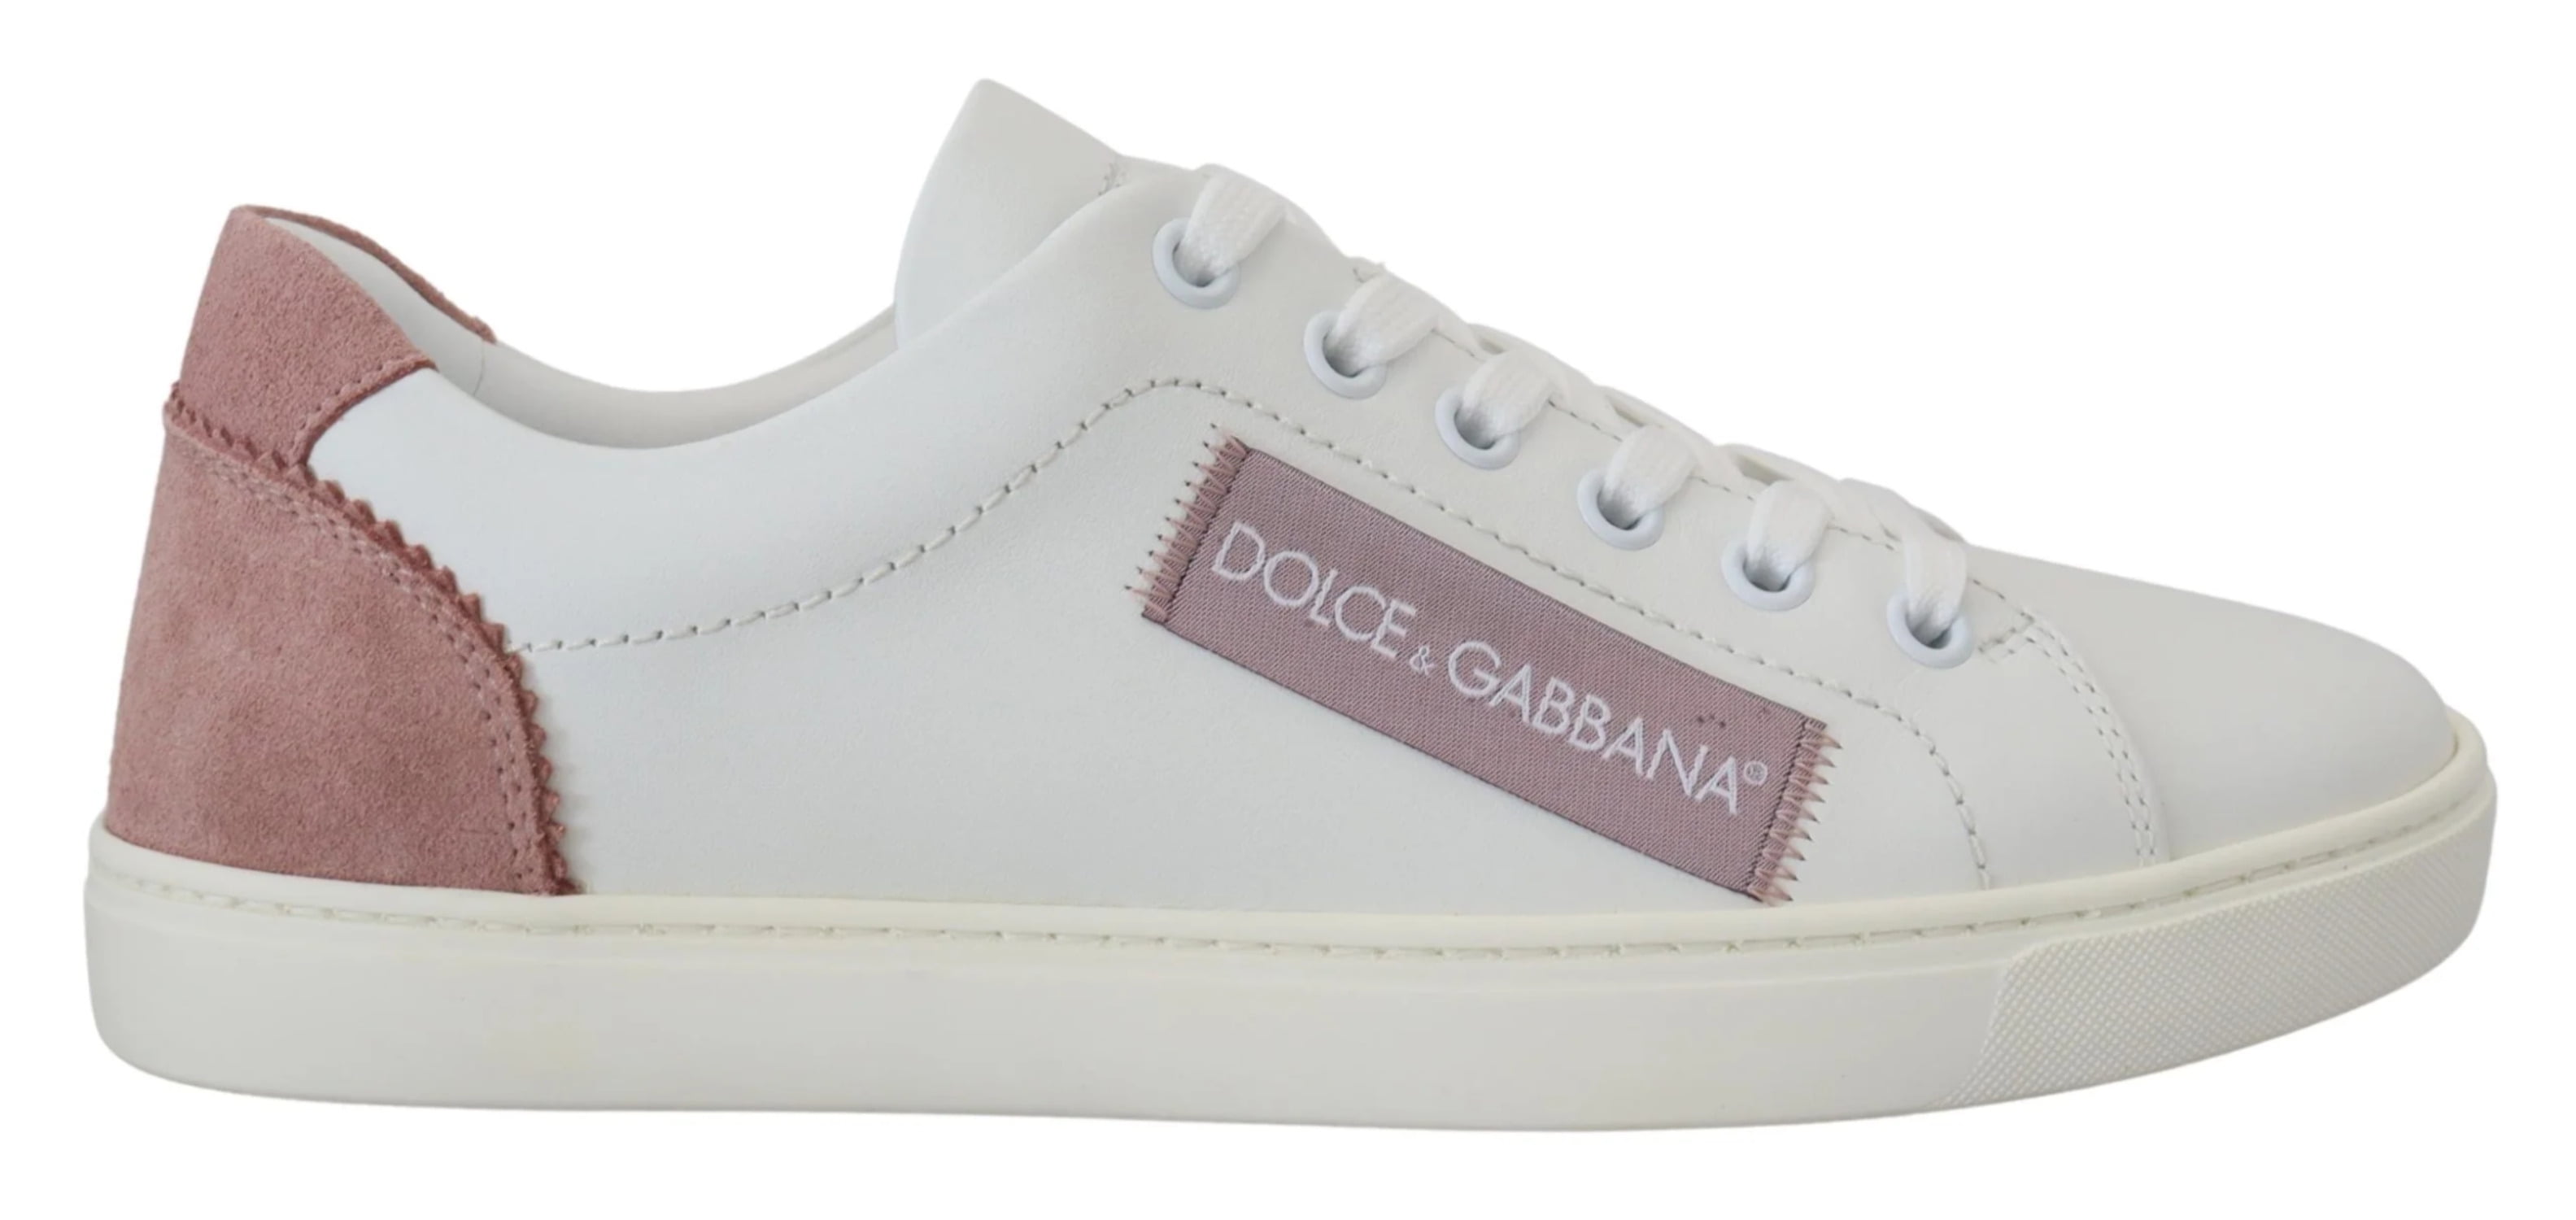 Dolce & Gabbana Logo-painted Leather Sneakers In White | ModeSens | Sneakers,  Hype shoes, Cute sneakers